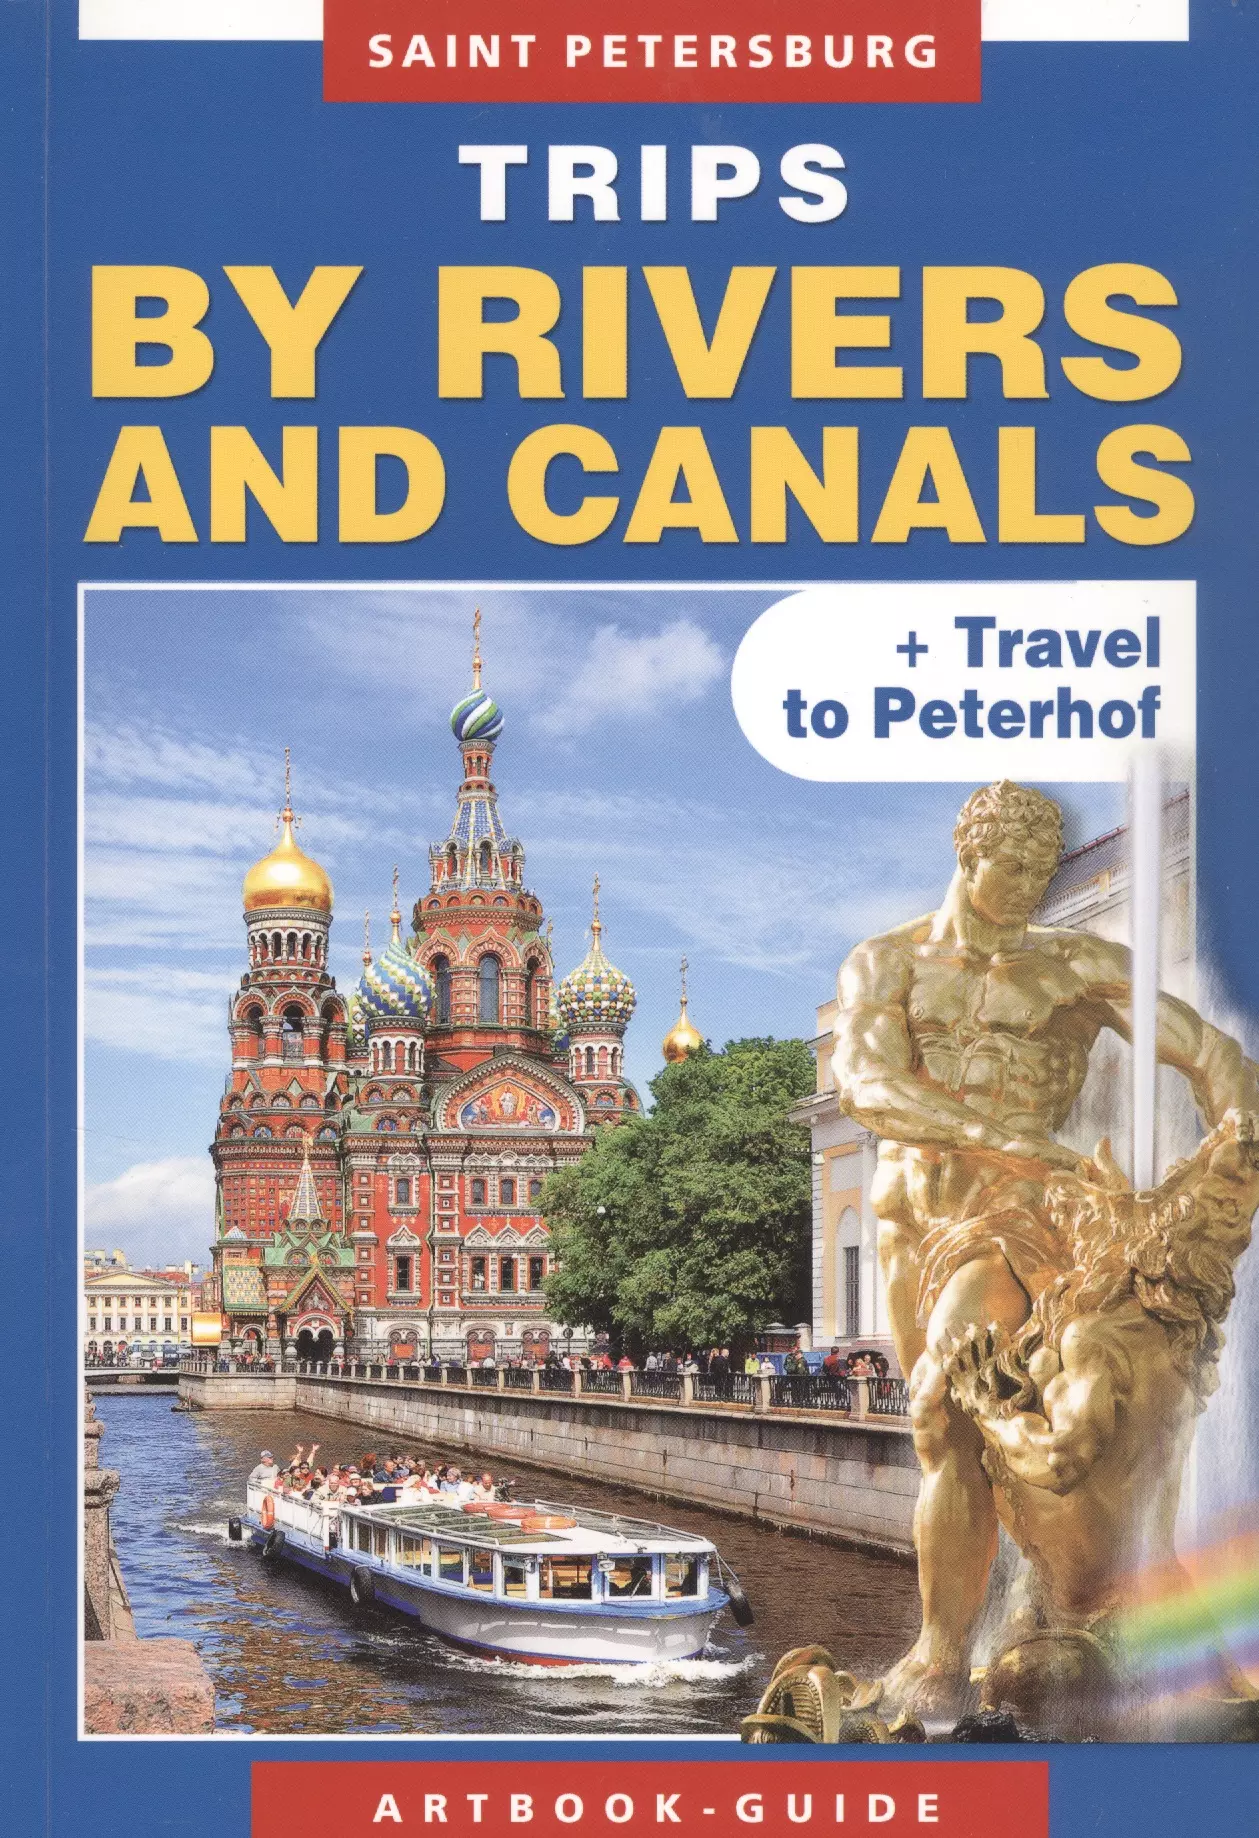 Lobanova T.J. - Saint Petersburg. Trips by rivers and canals + Travel to Peterhof. Artbook-guide